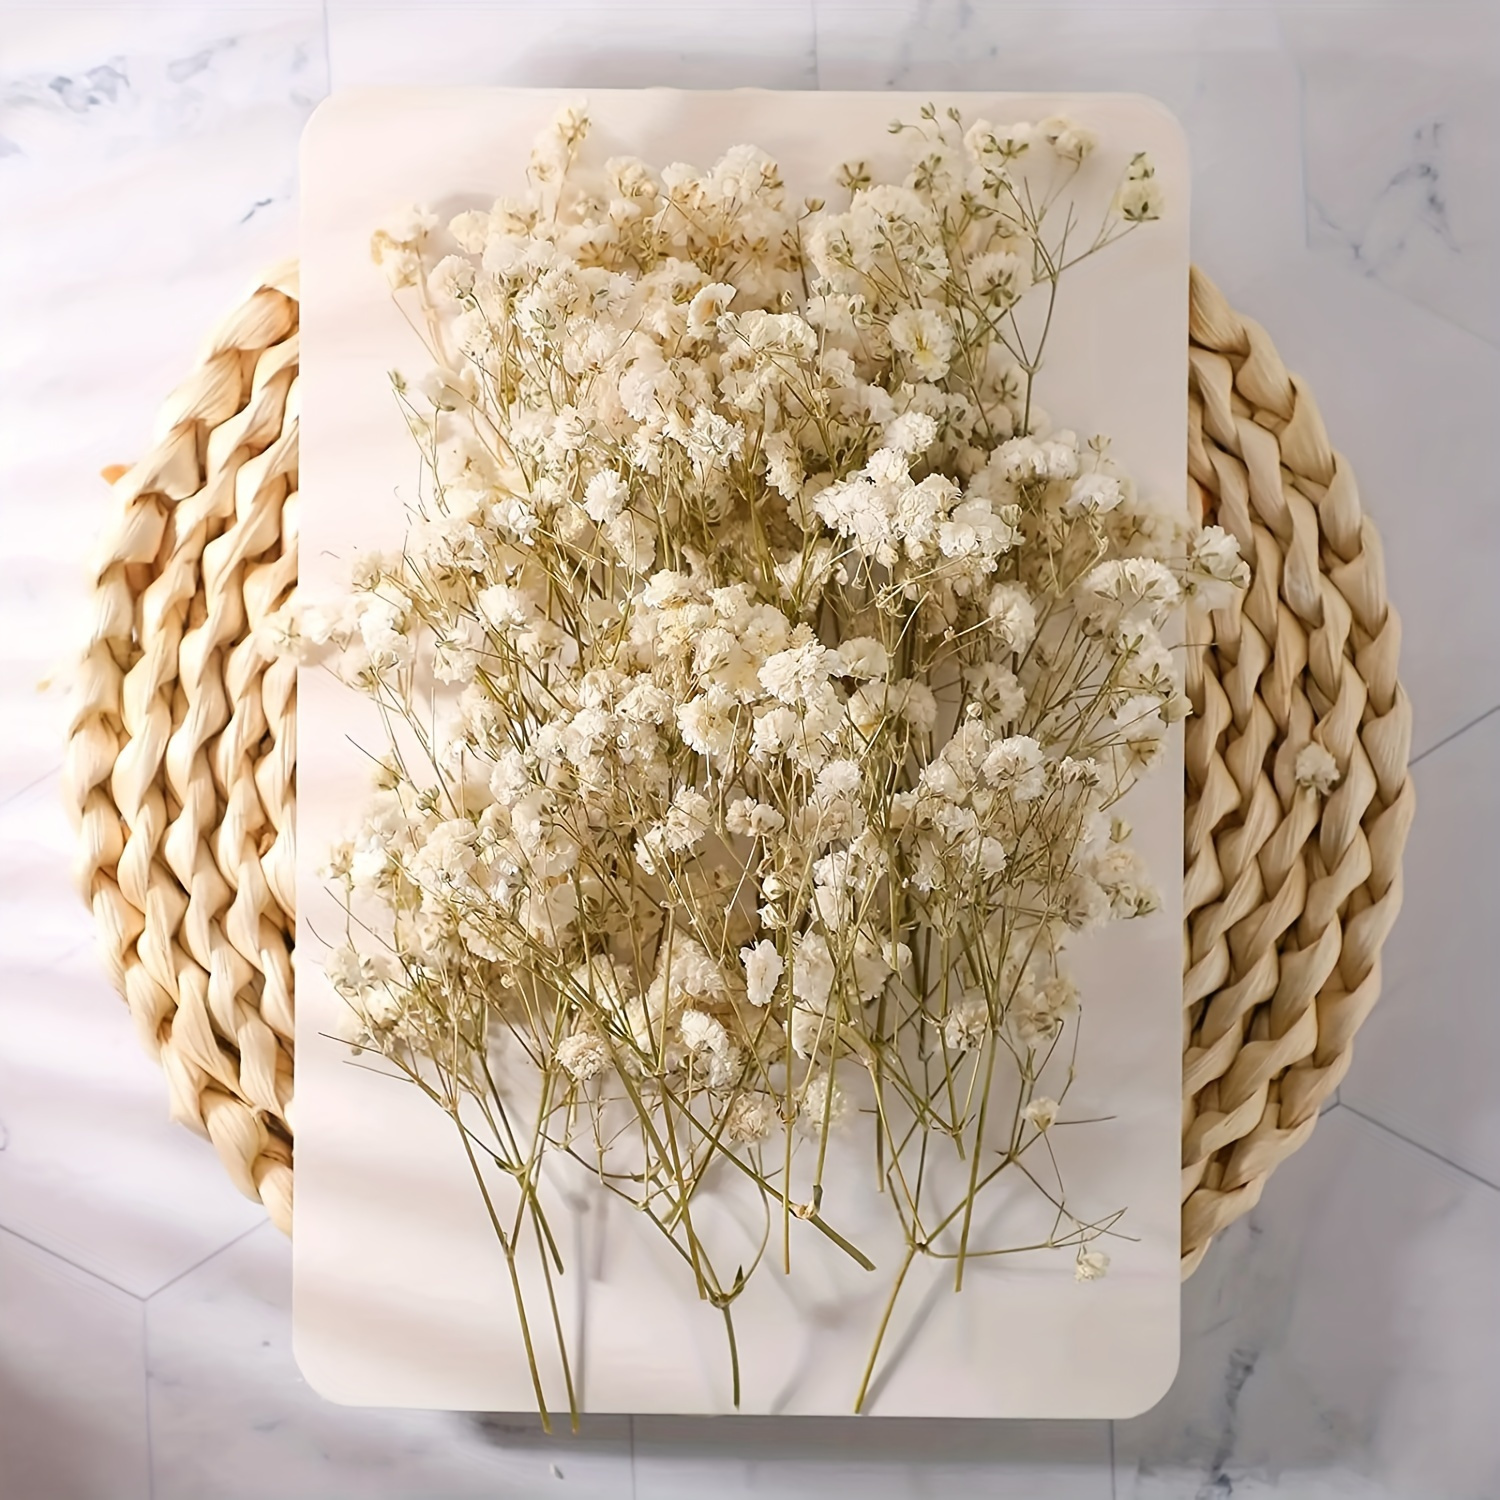 

50/100pcs, Artificial White Mini Dried Baby Breath Flower Gypsophila Ivory Flowers For Vase Wedding Home Office Party Garden Card Making Decor, Diy Decor